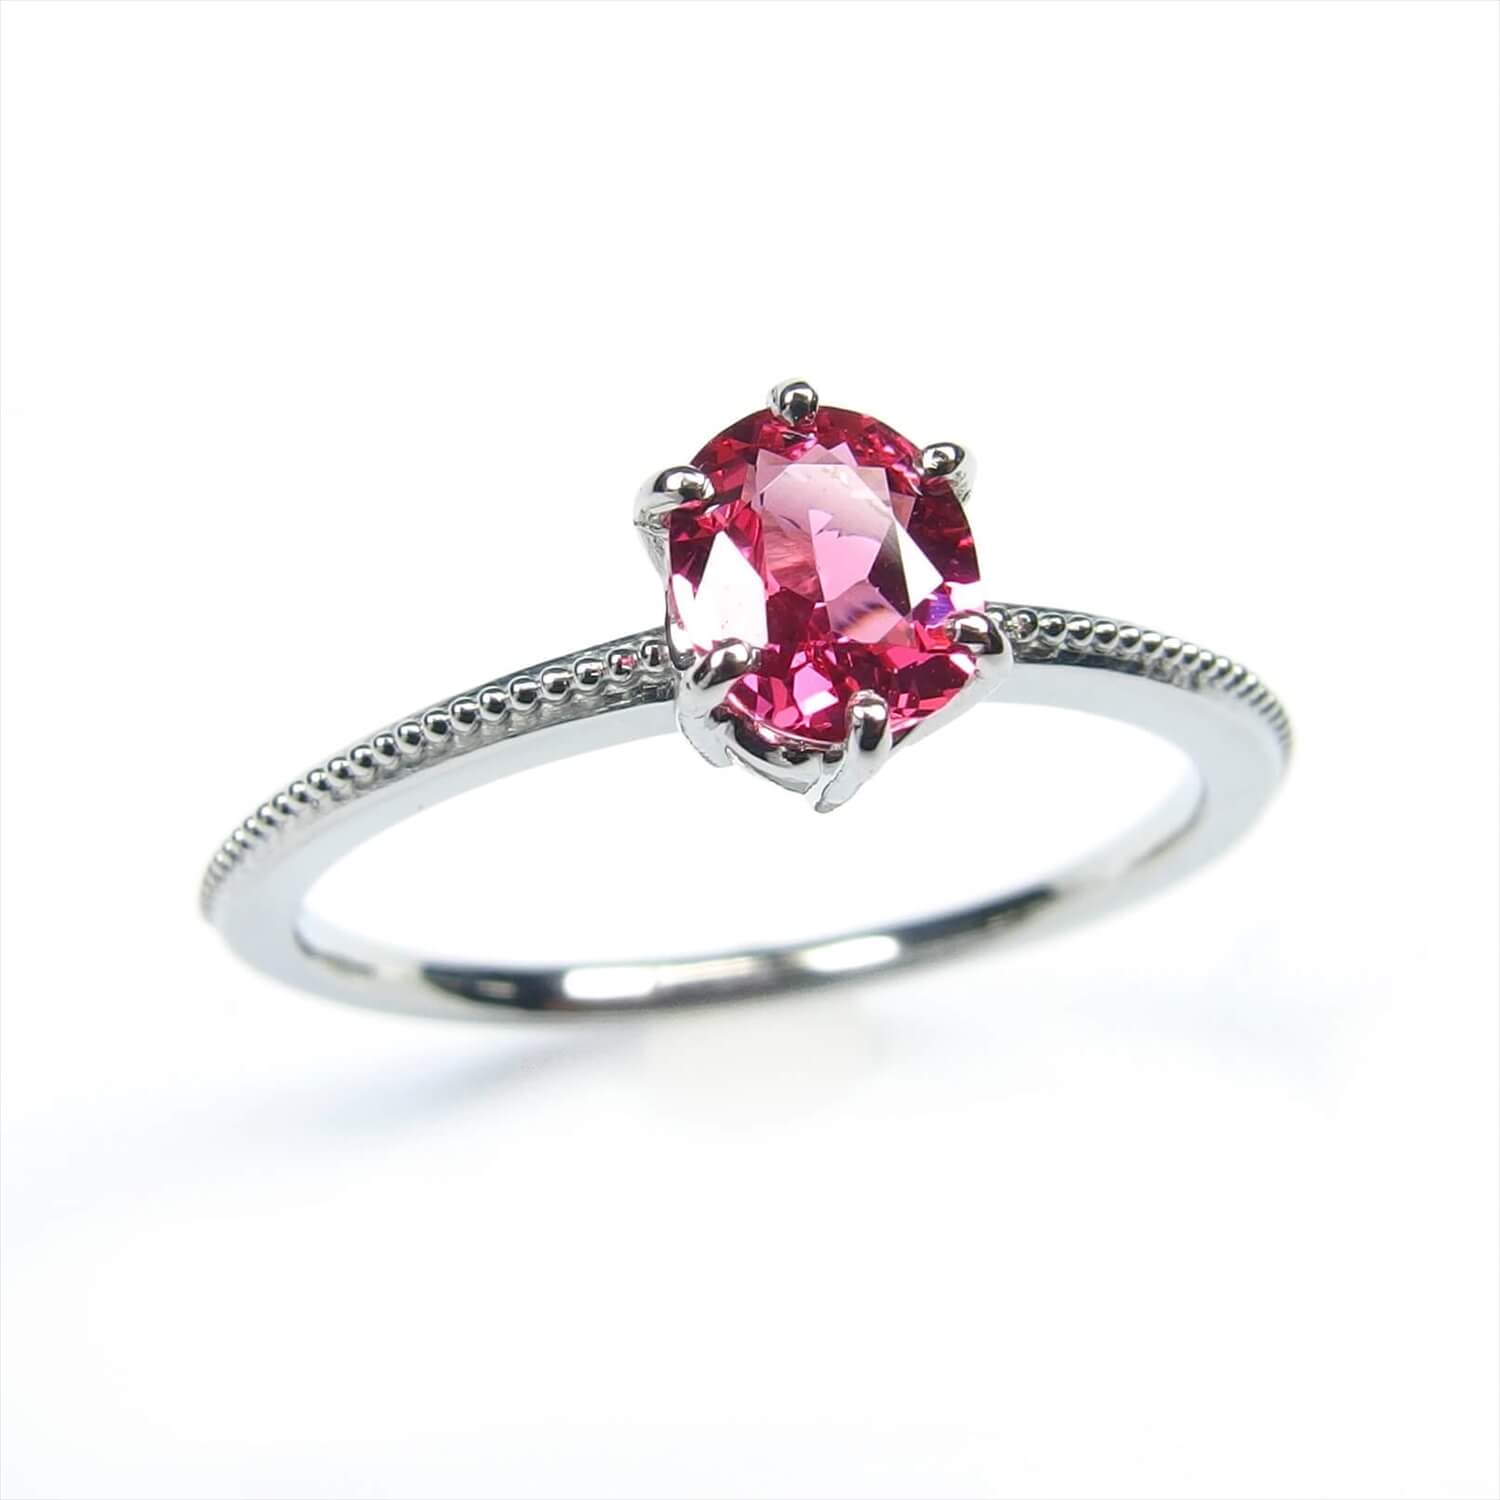 Spinel Ring